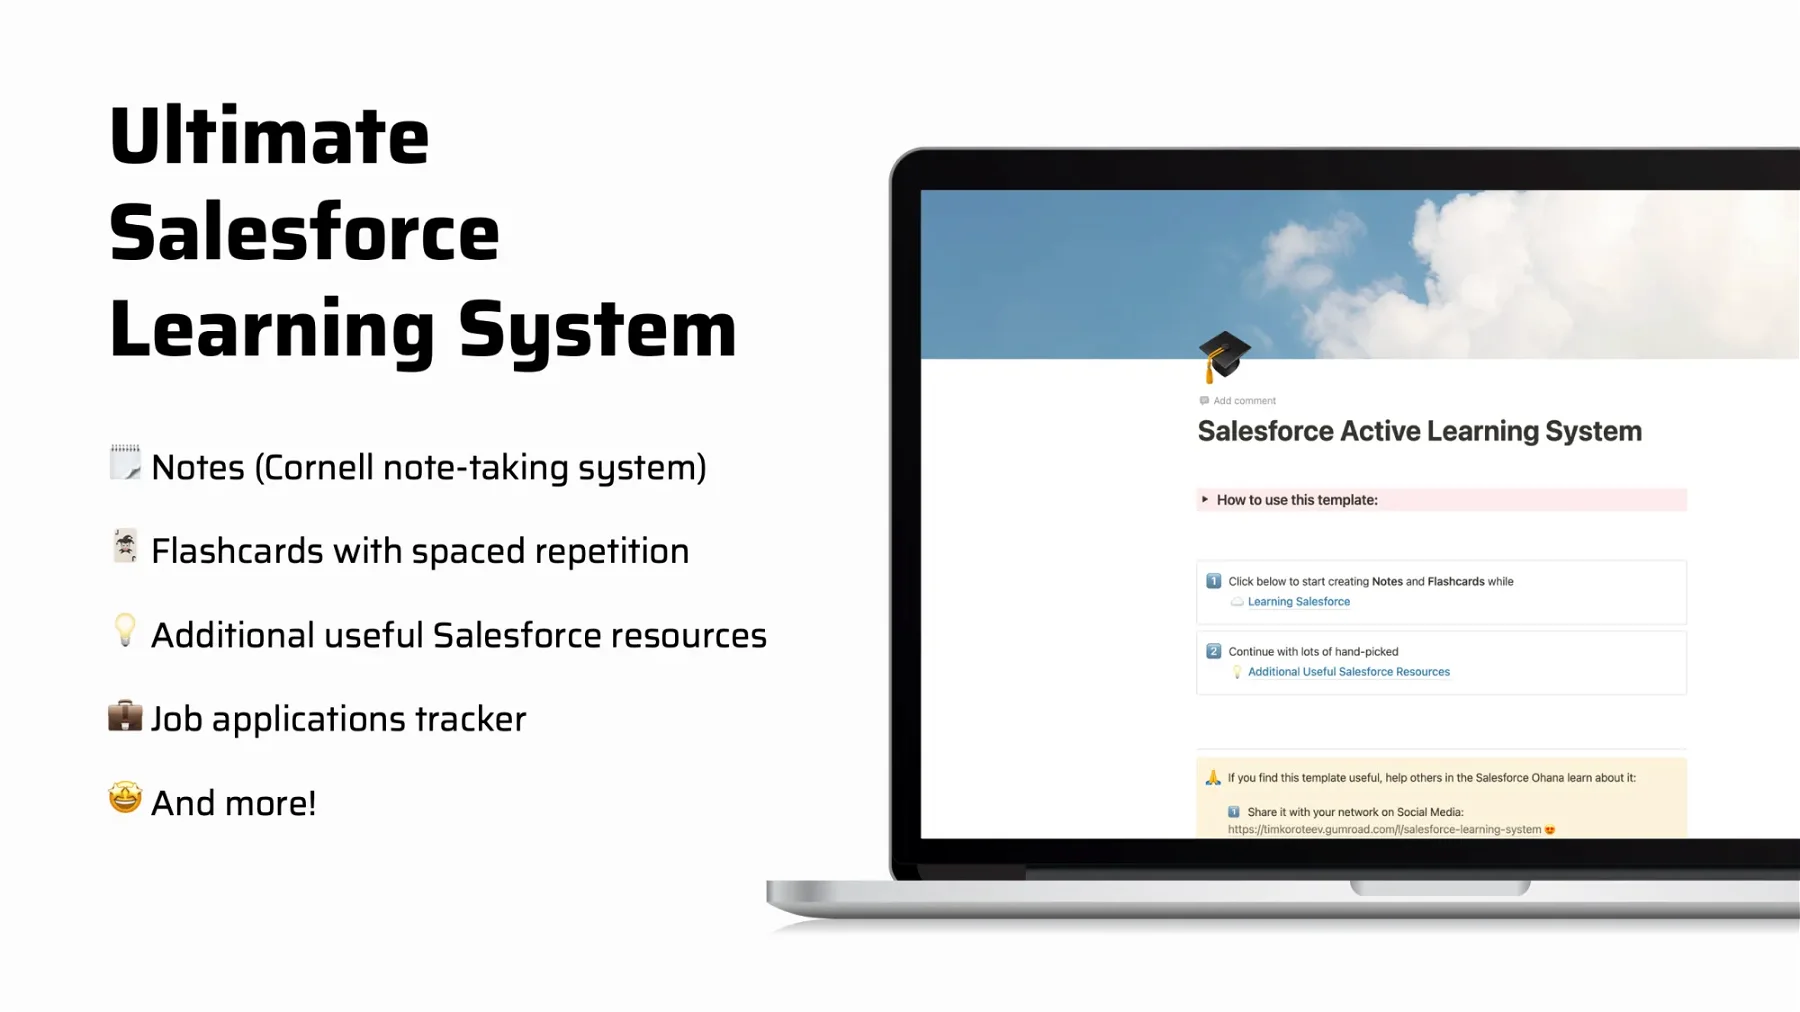 Salesforce Active Learning System in Notion